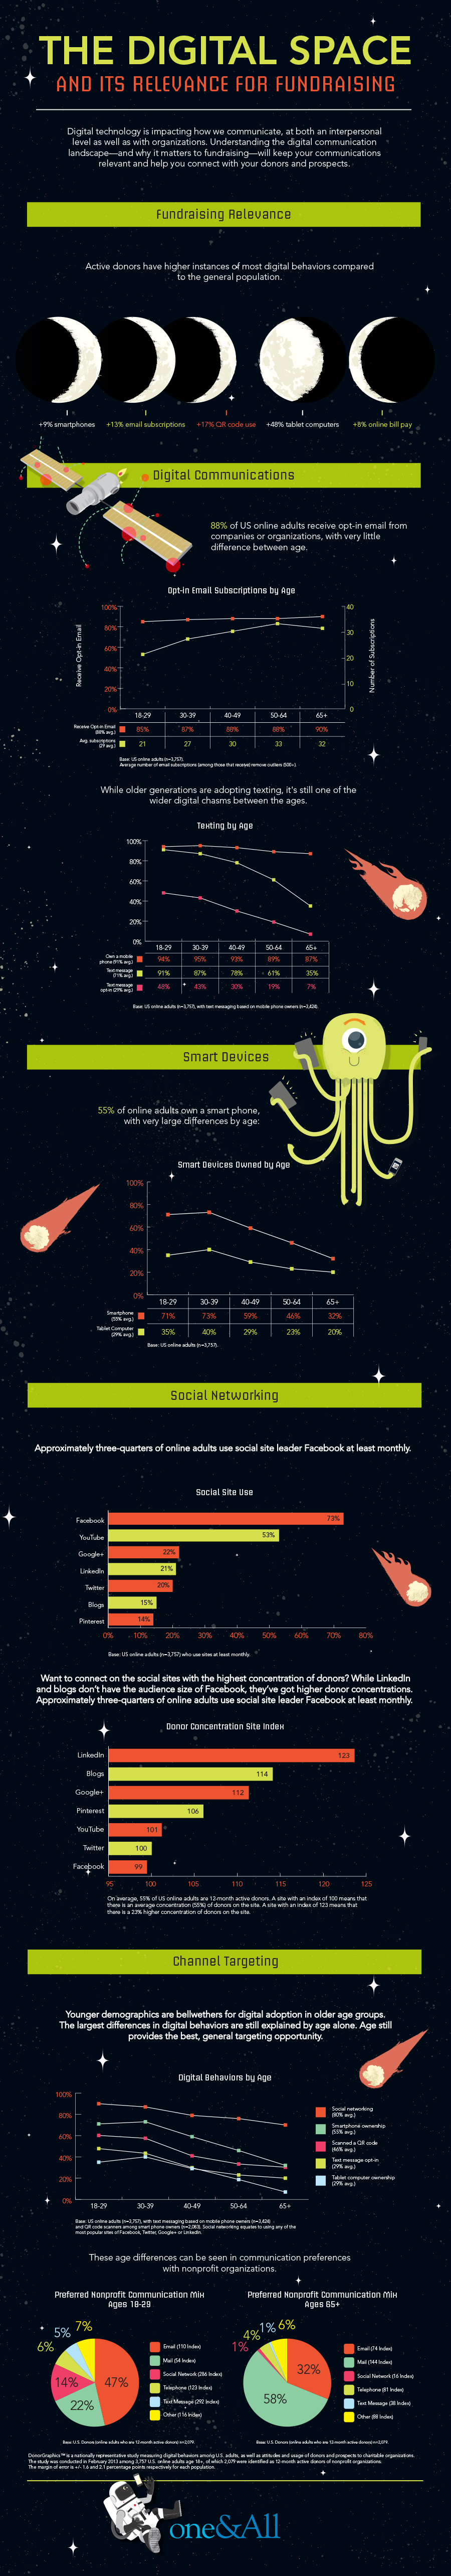 The Digital Space Infographic